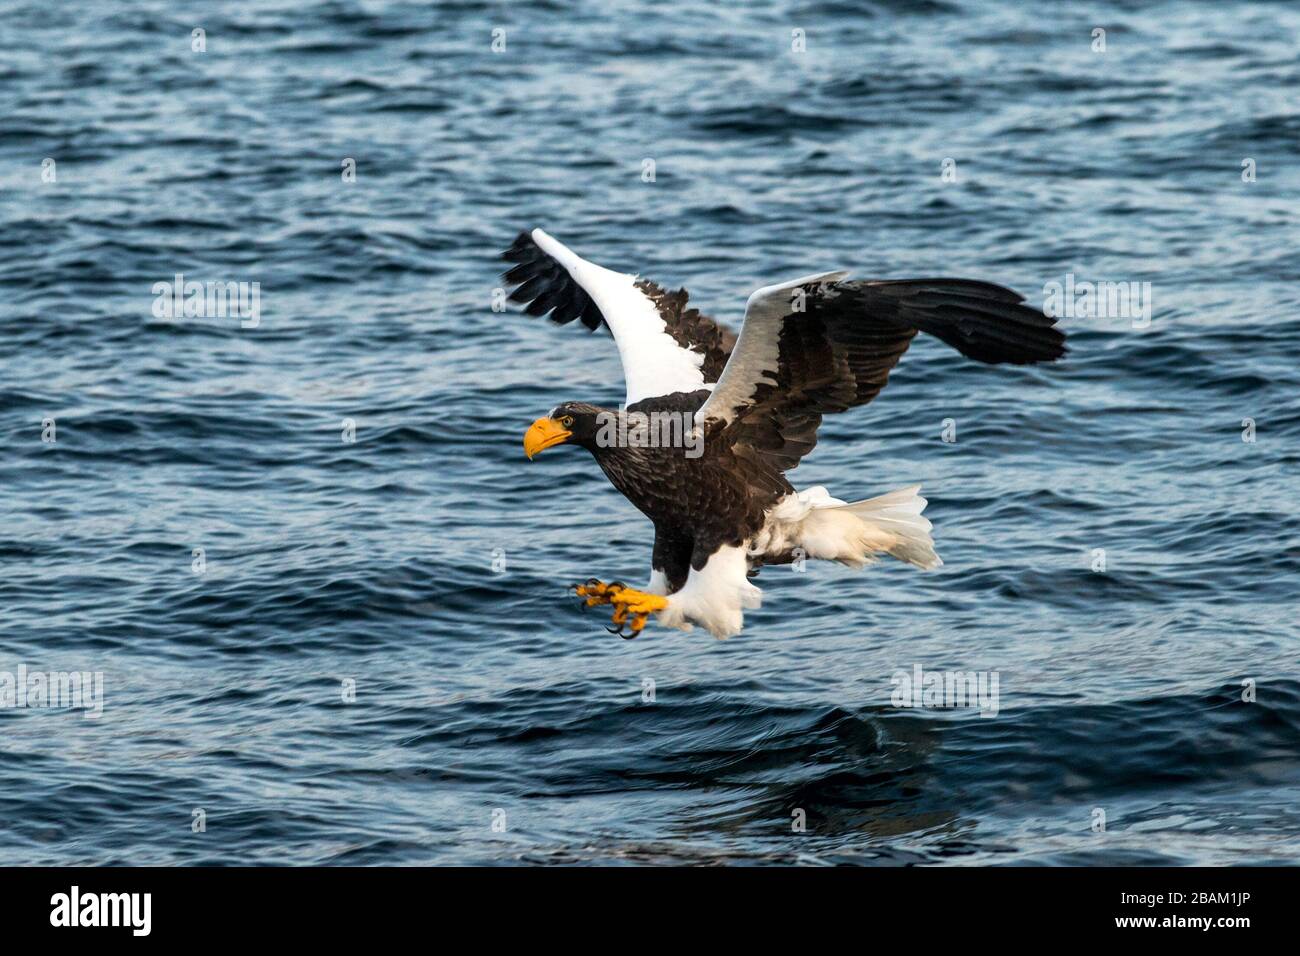 Steller's sea eagle in flight hunting fish from sea at sunrise,Hokkaido, Japan, majestic sea eagle with big claws aiming to catch fish from water surf Stock Photo